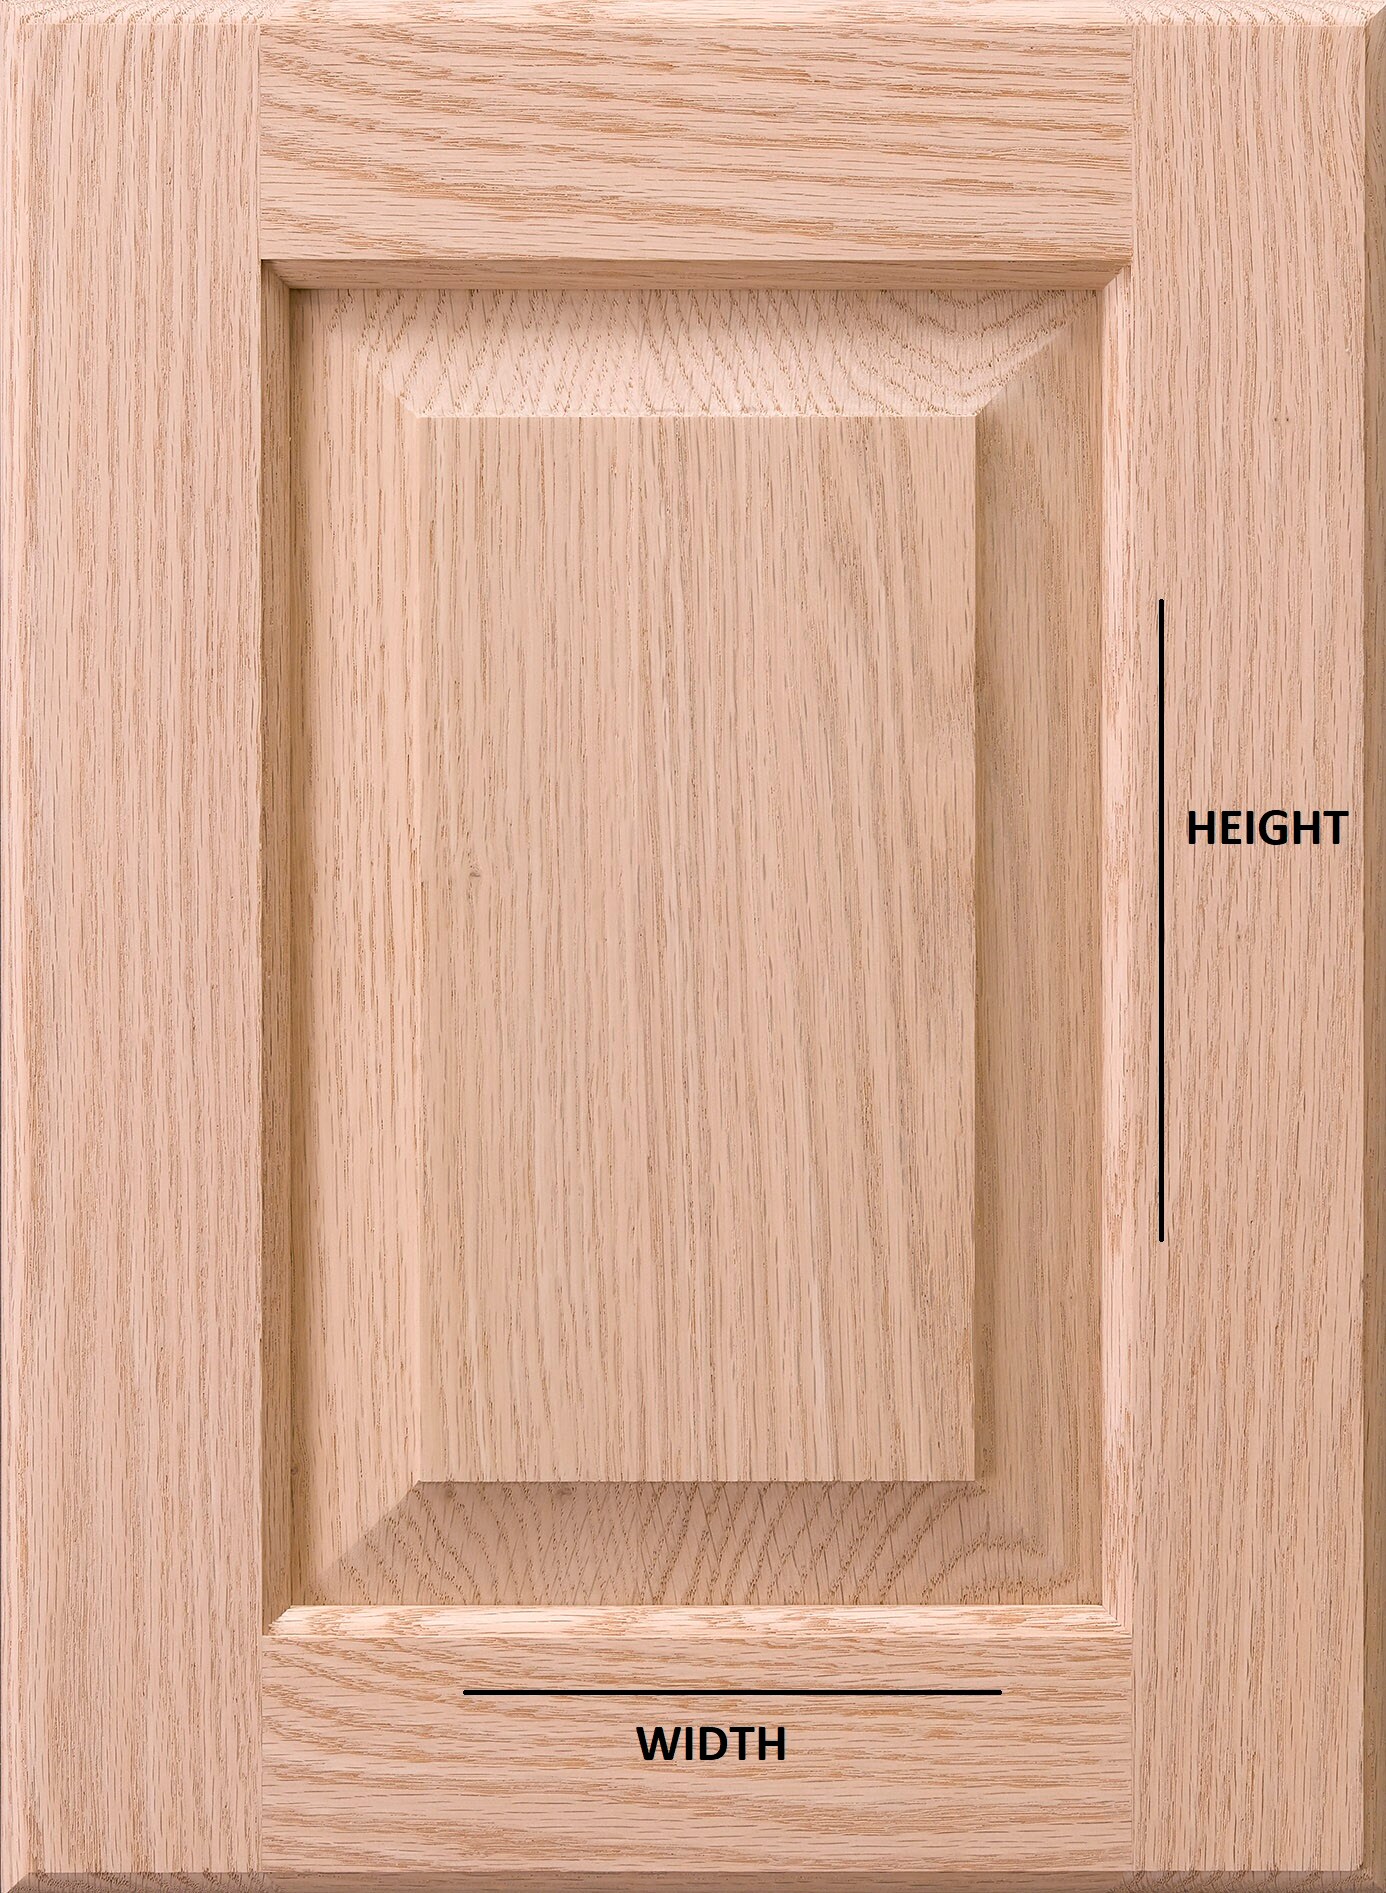 Surfaces 10 In W X 28 H Red Oak Unfinished Square Wall Cabinet Door Fits 12 30 Box The Kitchen Doors Department At Lowes Com